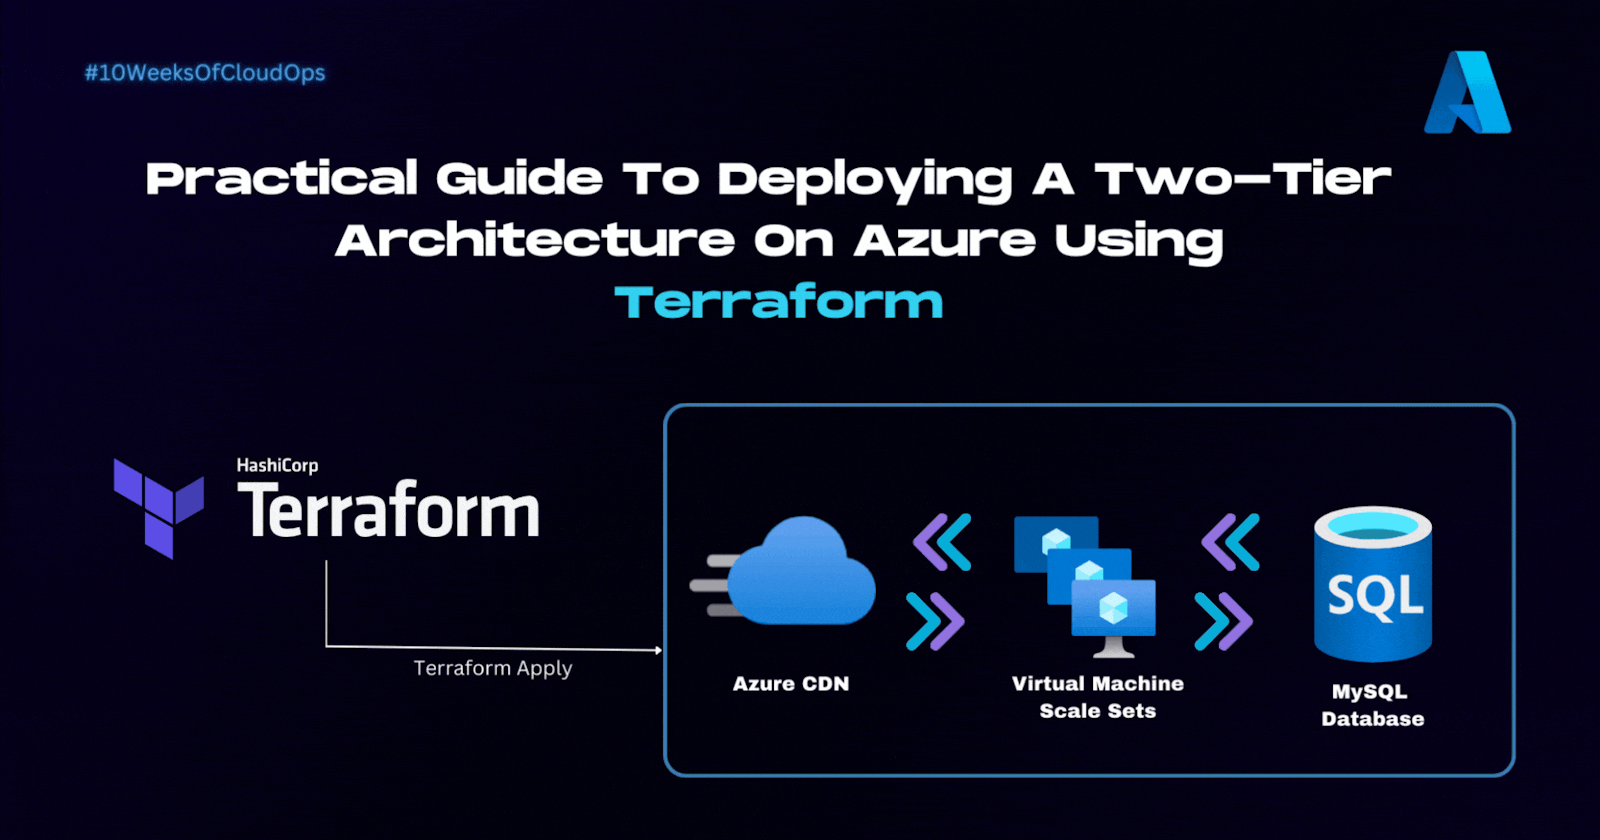 Automating The Deployment Of A Resilient 2-Tier Architecture On Azure  Using Terraform